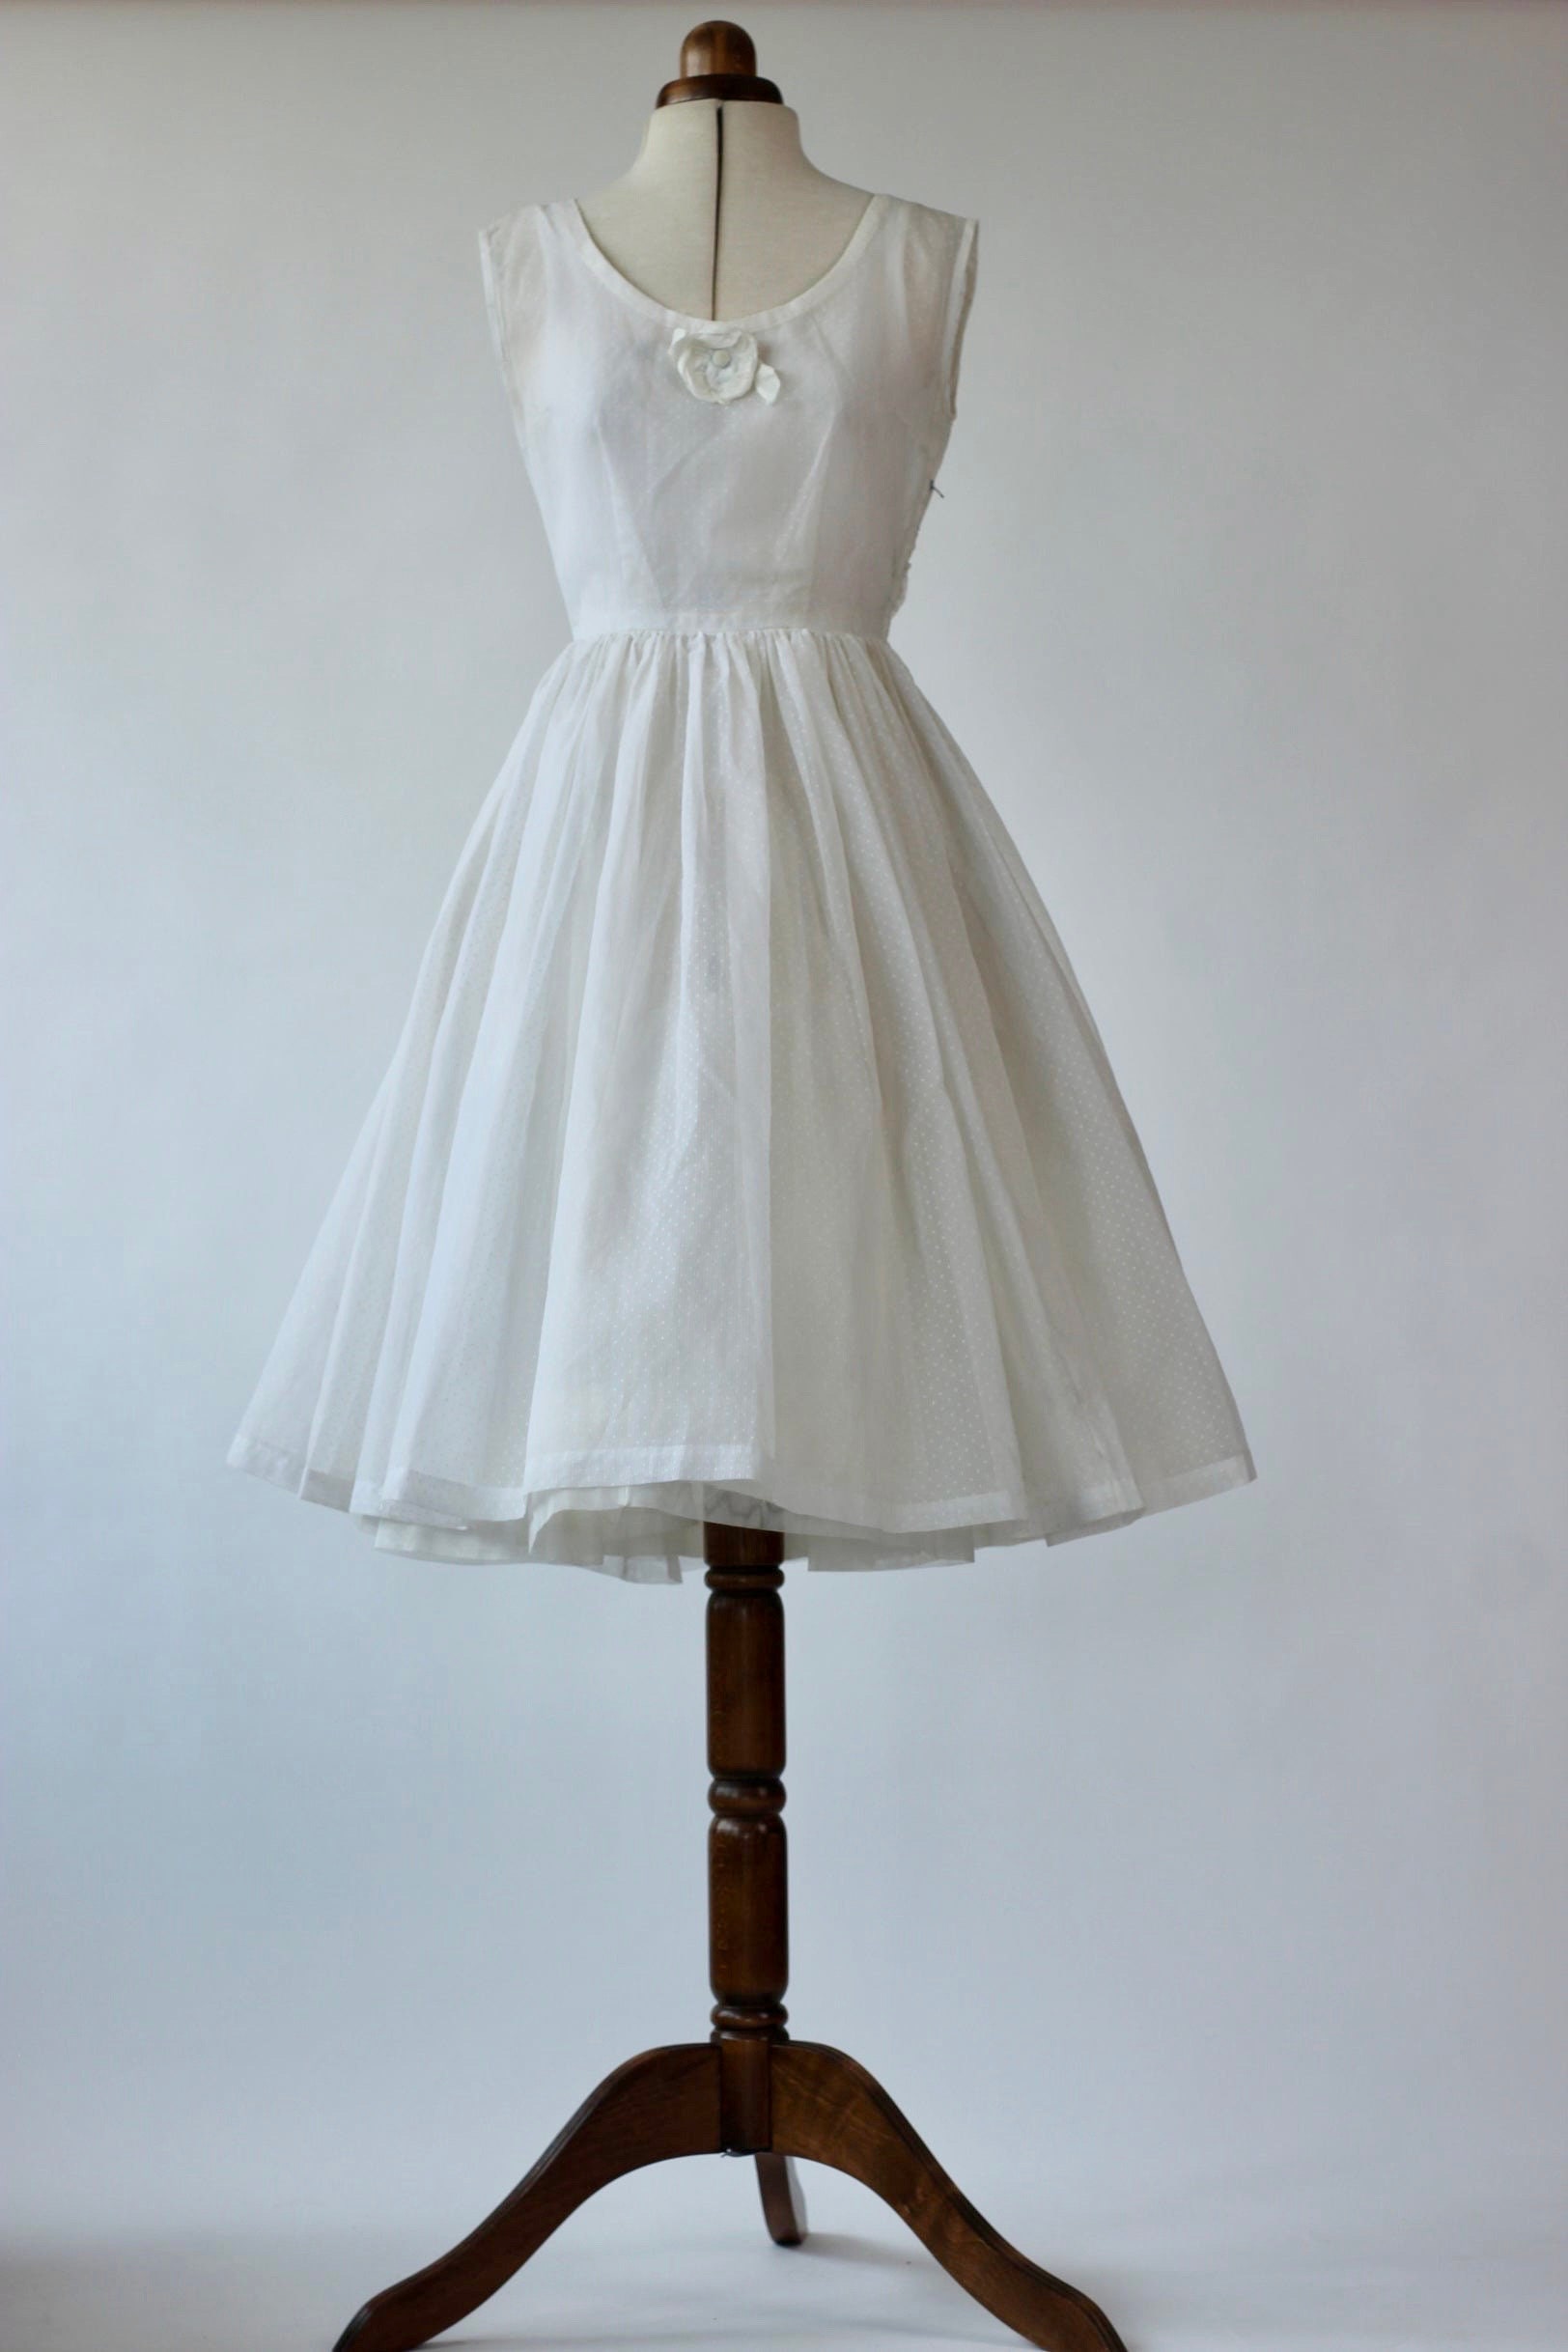 Vintage, 1950s White Sheer Dress With Dots